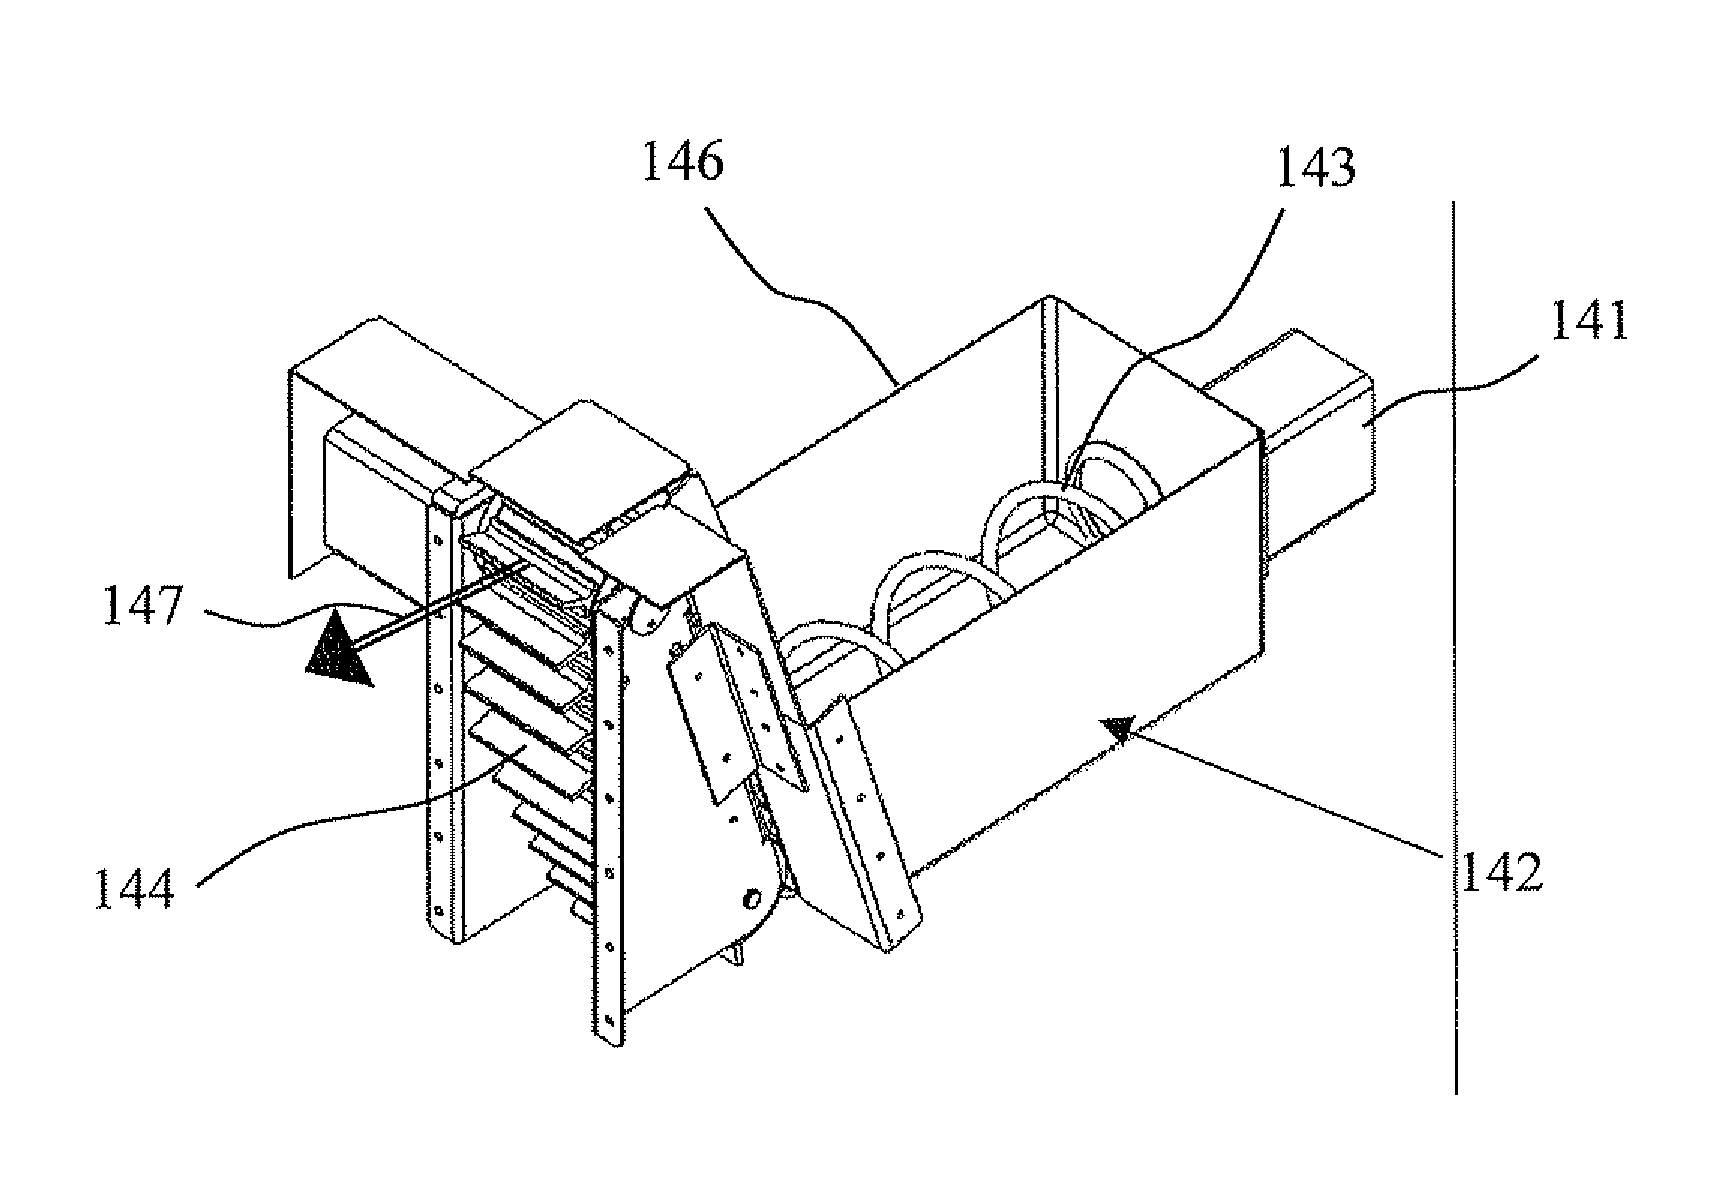 Devices and methods for producing controlled flavored ice drinks